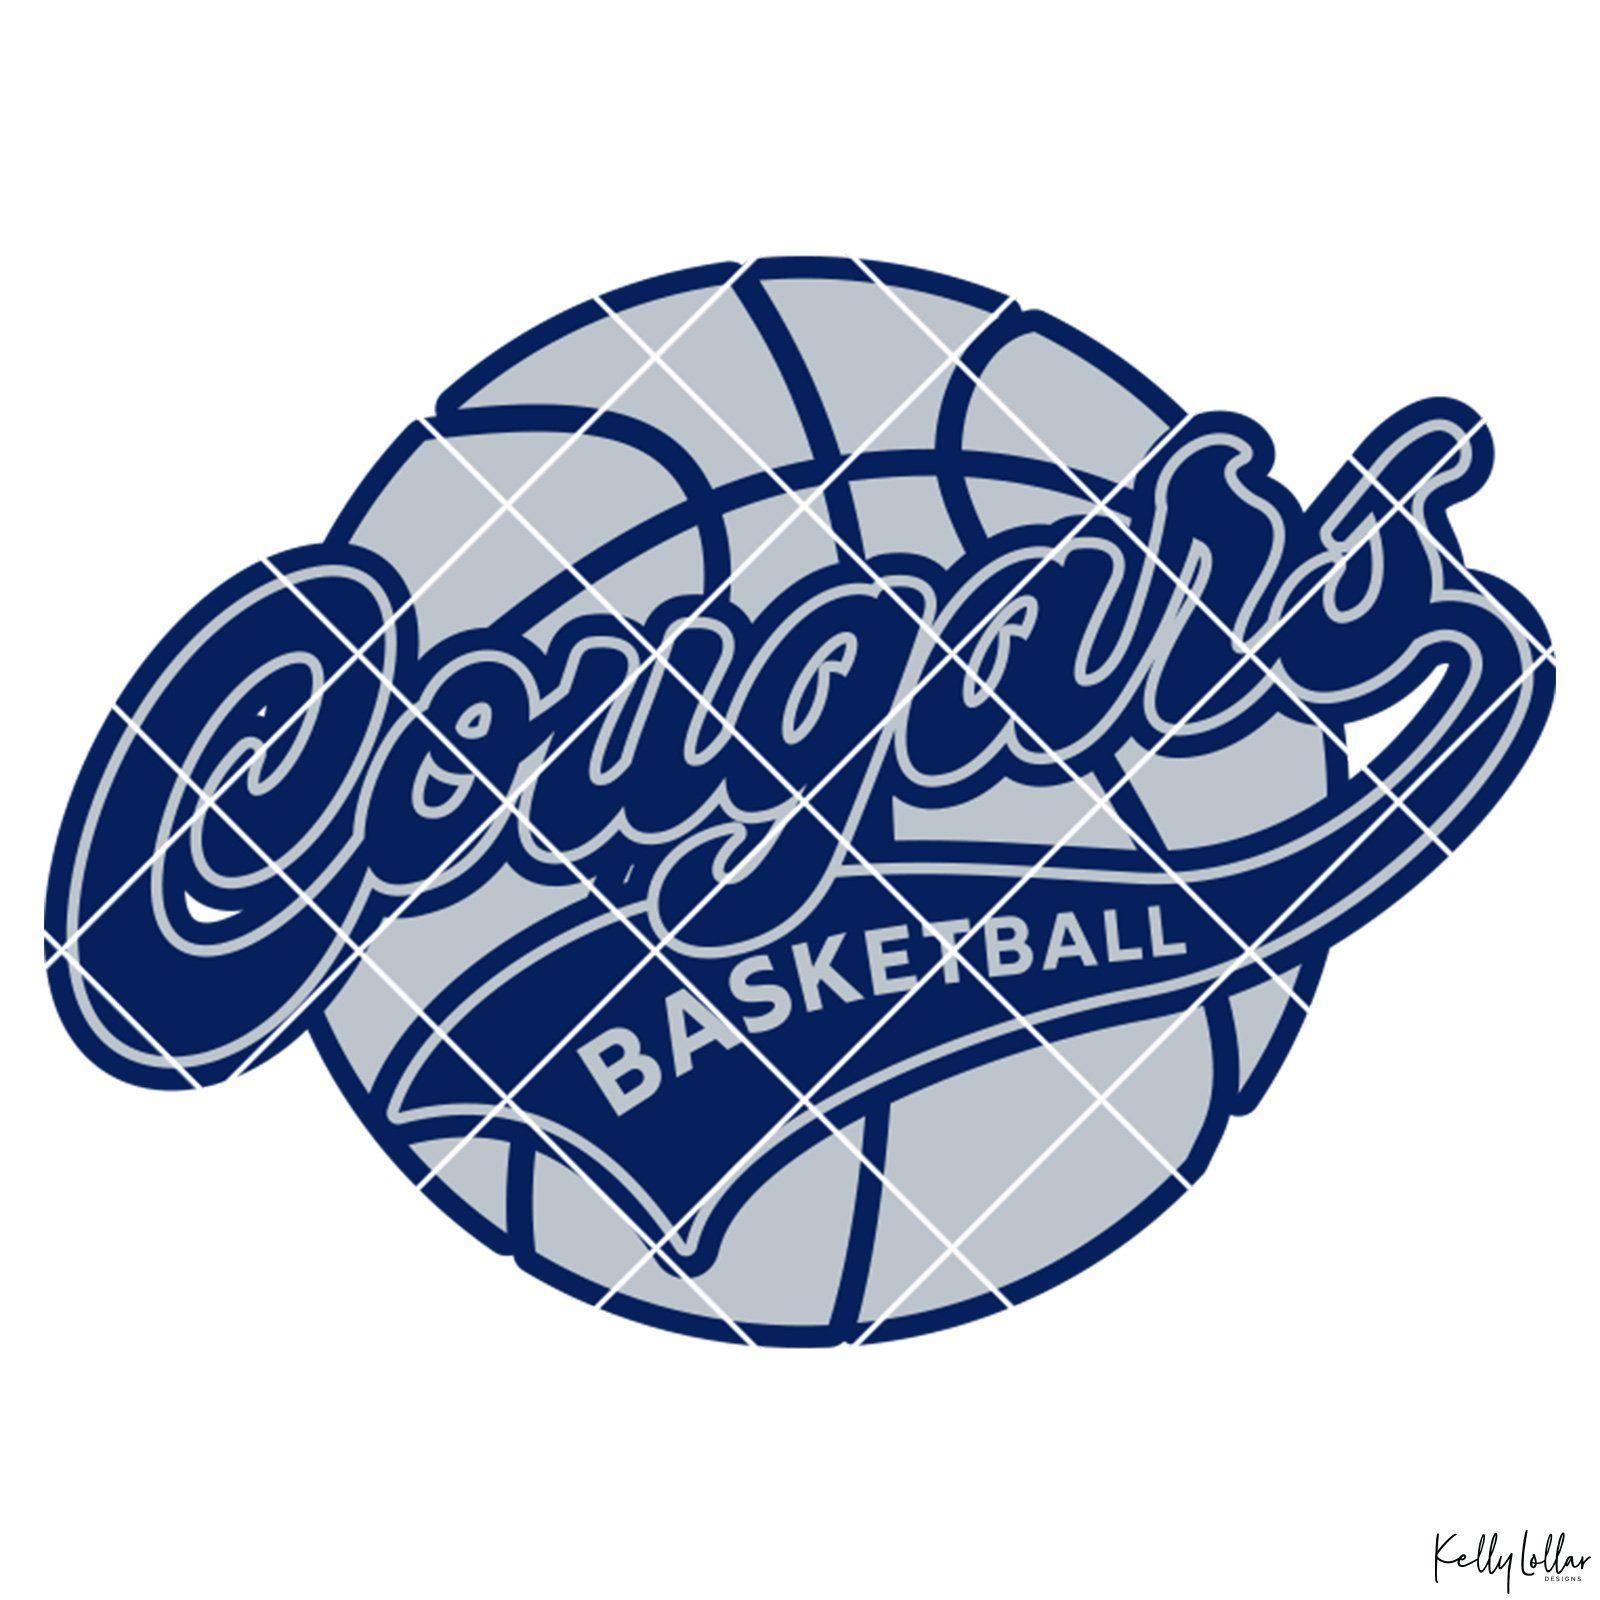 Cool Cougars Logo - Cougars Basketball Script. SVG DXF EPS PNG Cut Files Lollar